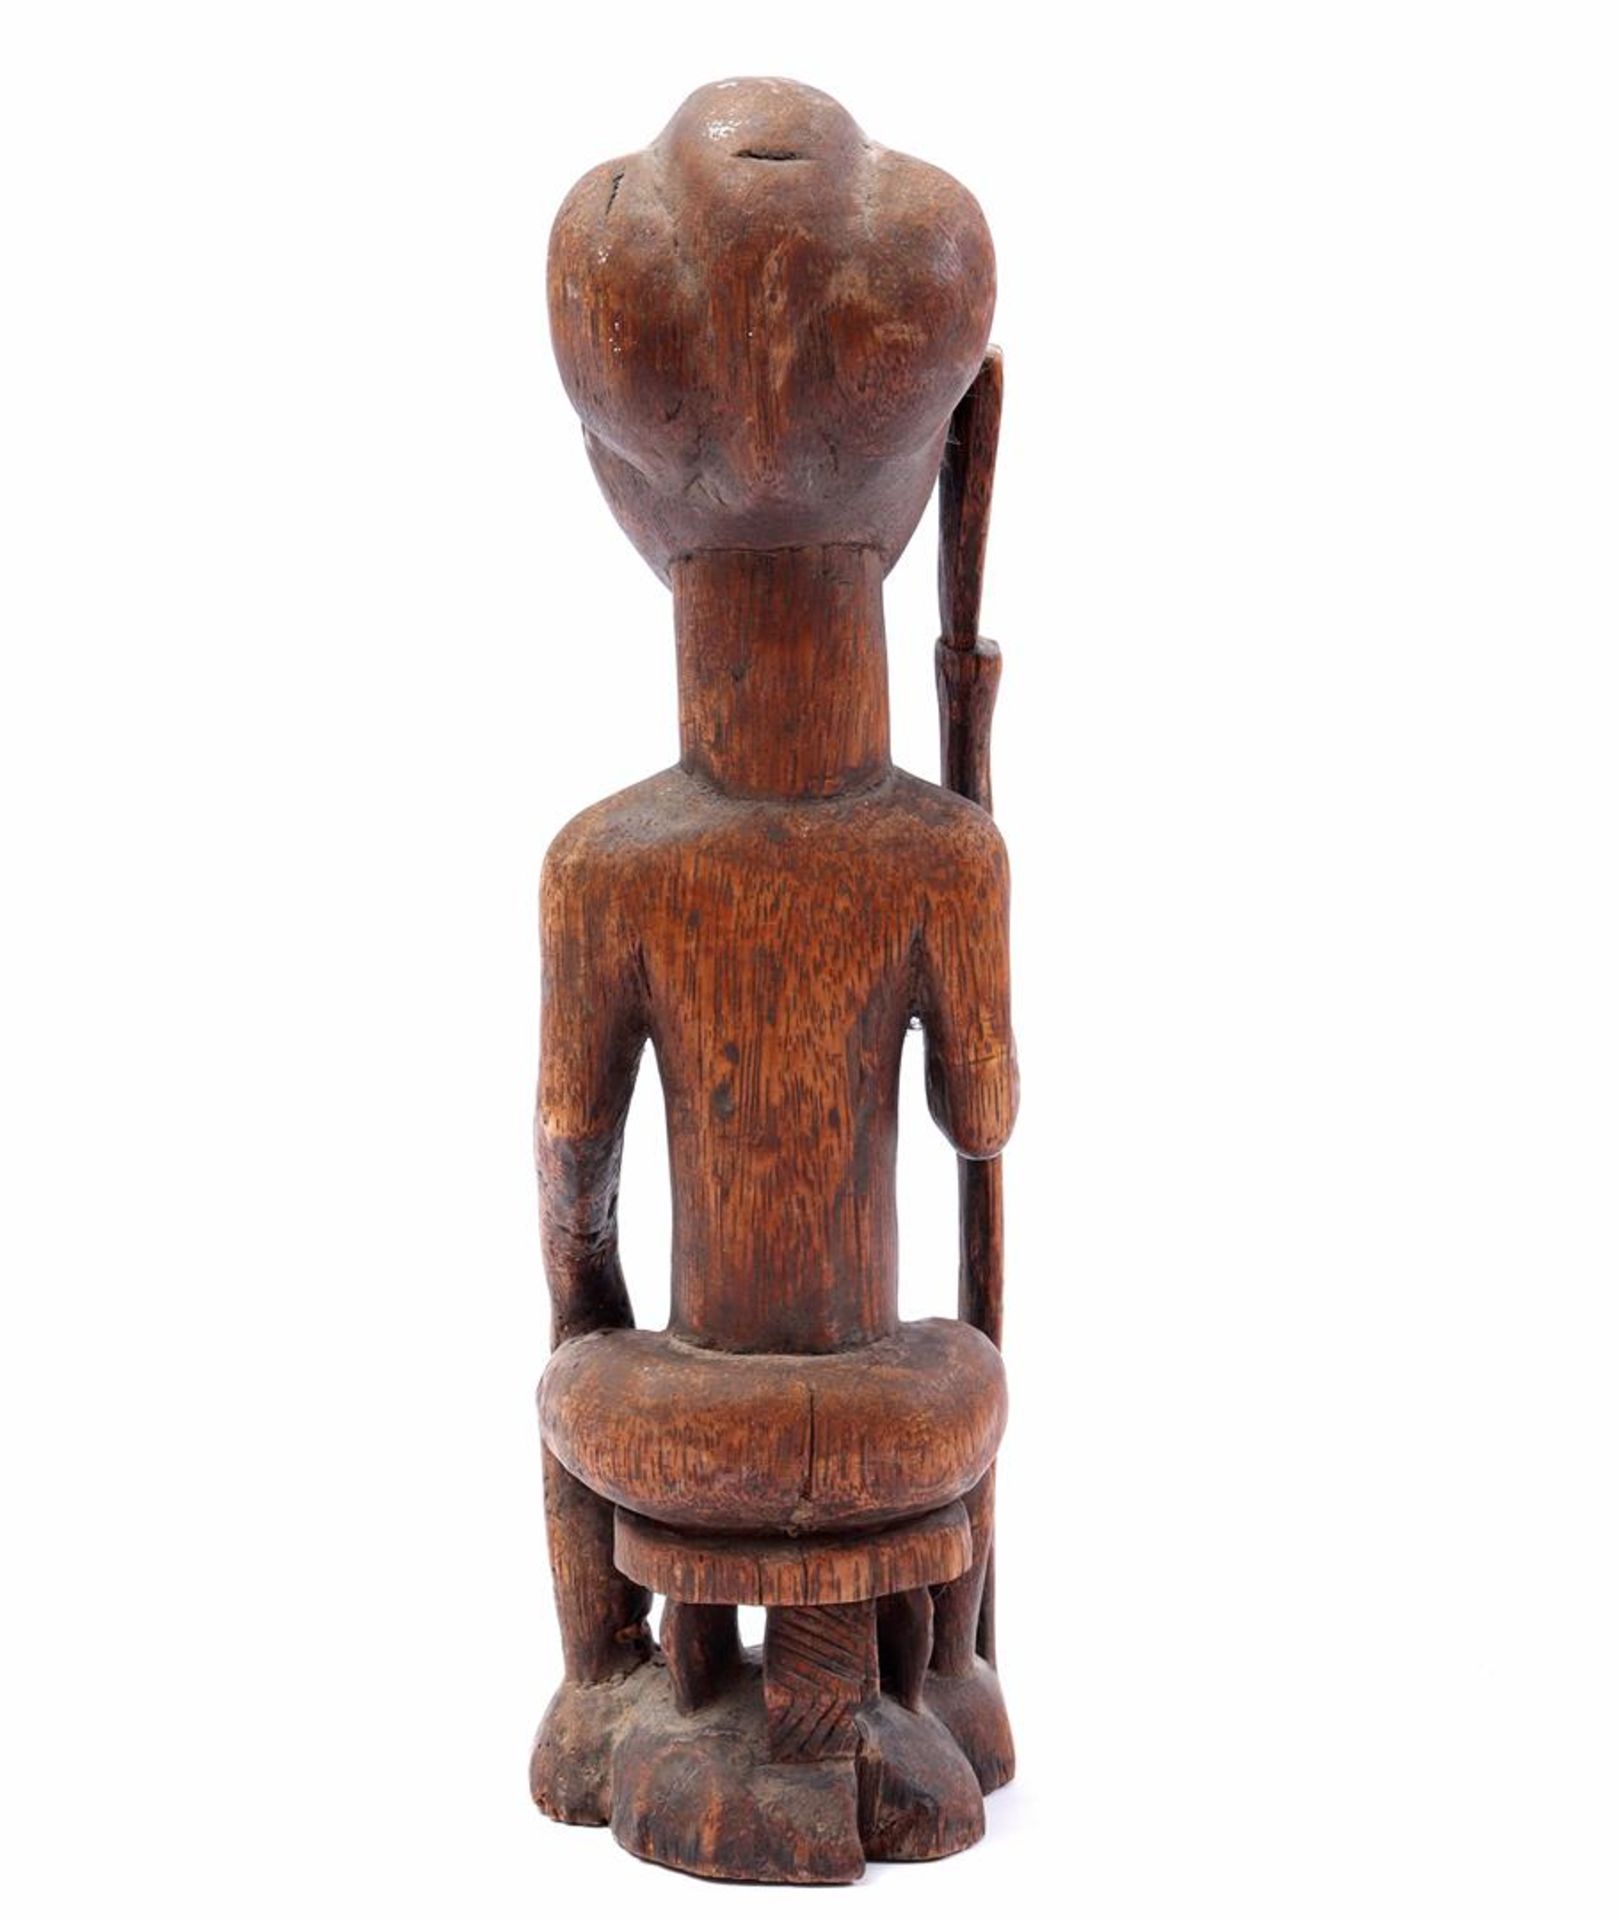 Ceremonial wooden figurine of a person - Image 3 of 3